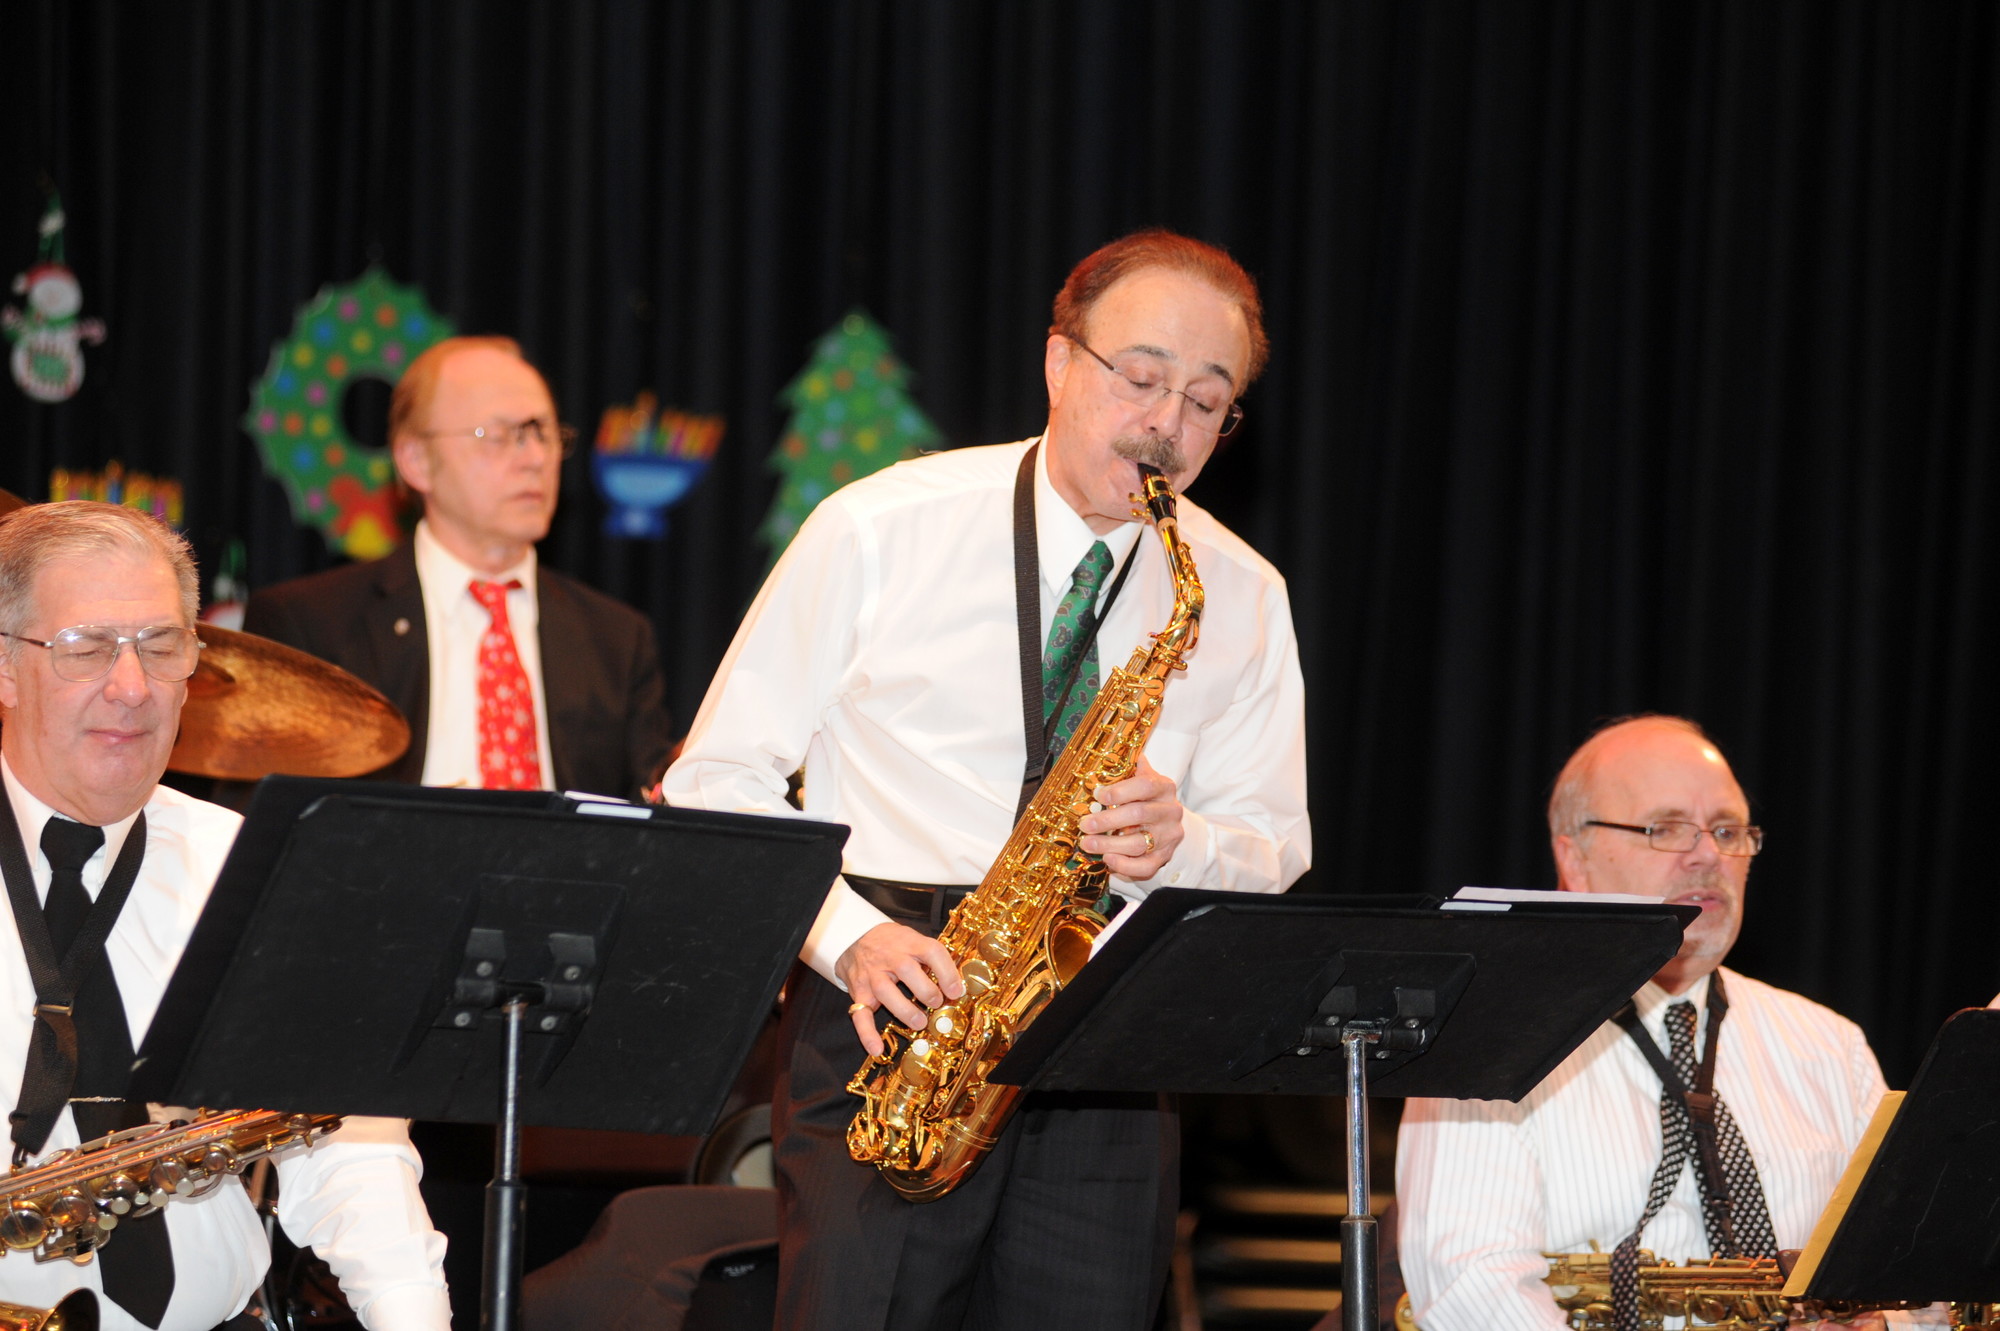 Ron Tancredi of the Seaford Jazz Band entertained the crowd with a selection of holiday songs on Dec. 13.